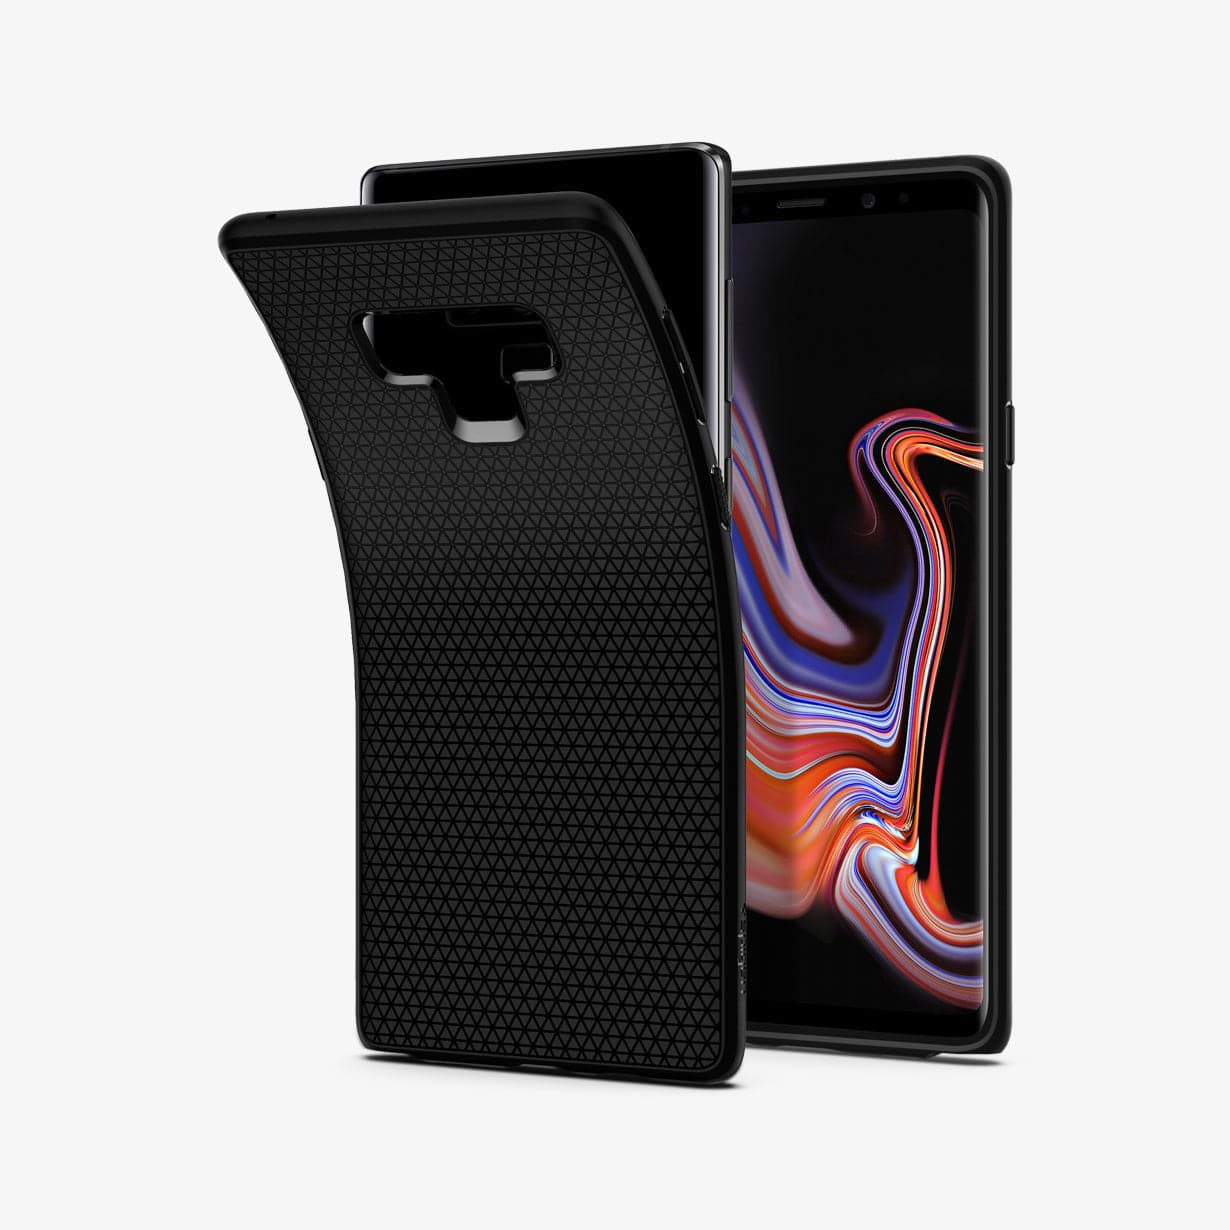 599CS24580 - Galaxy Note 9 Liquid Air Case in black showing the back and front with case bending away from the device